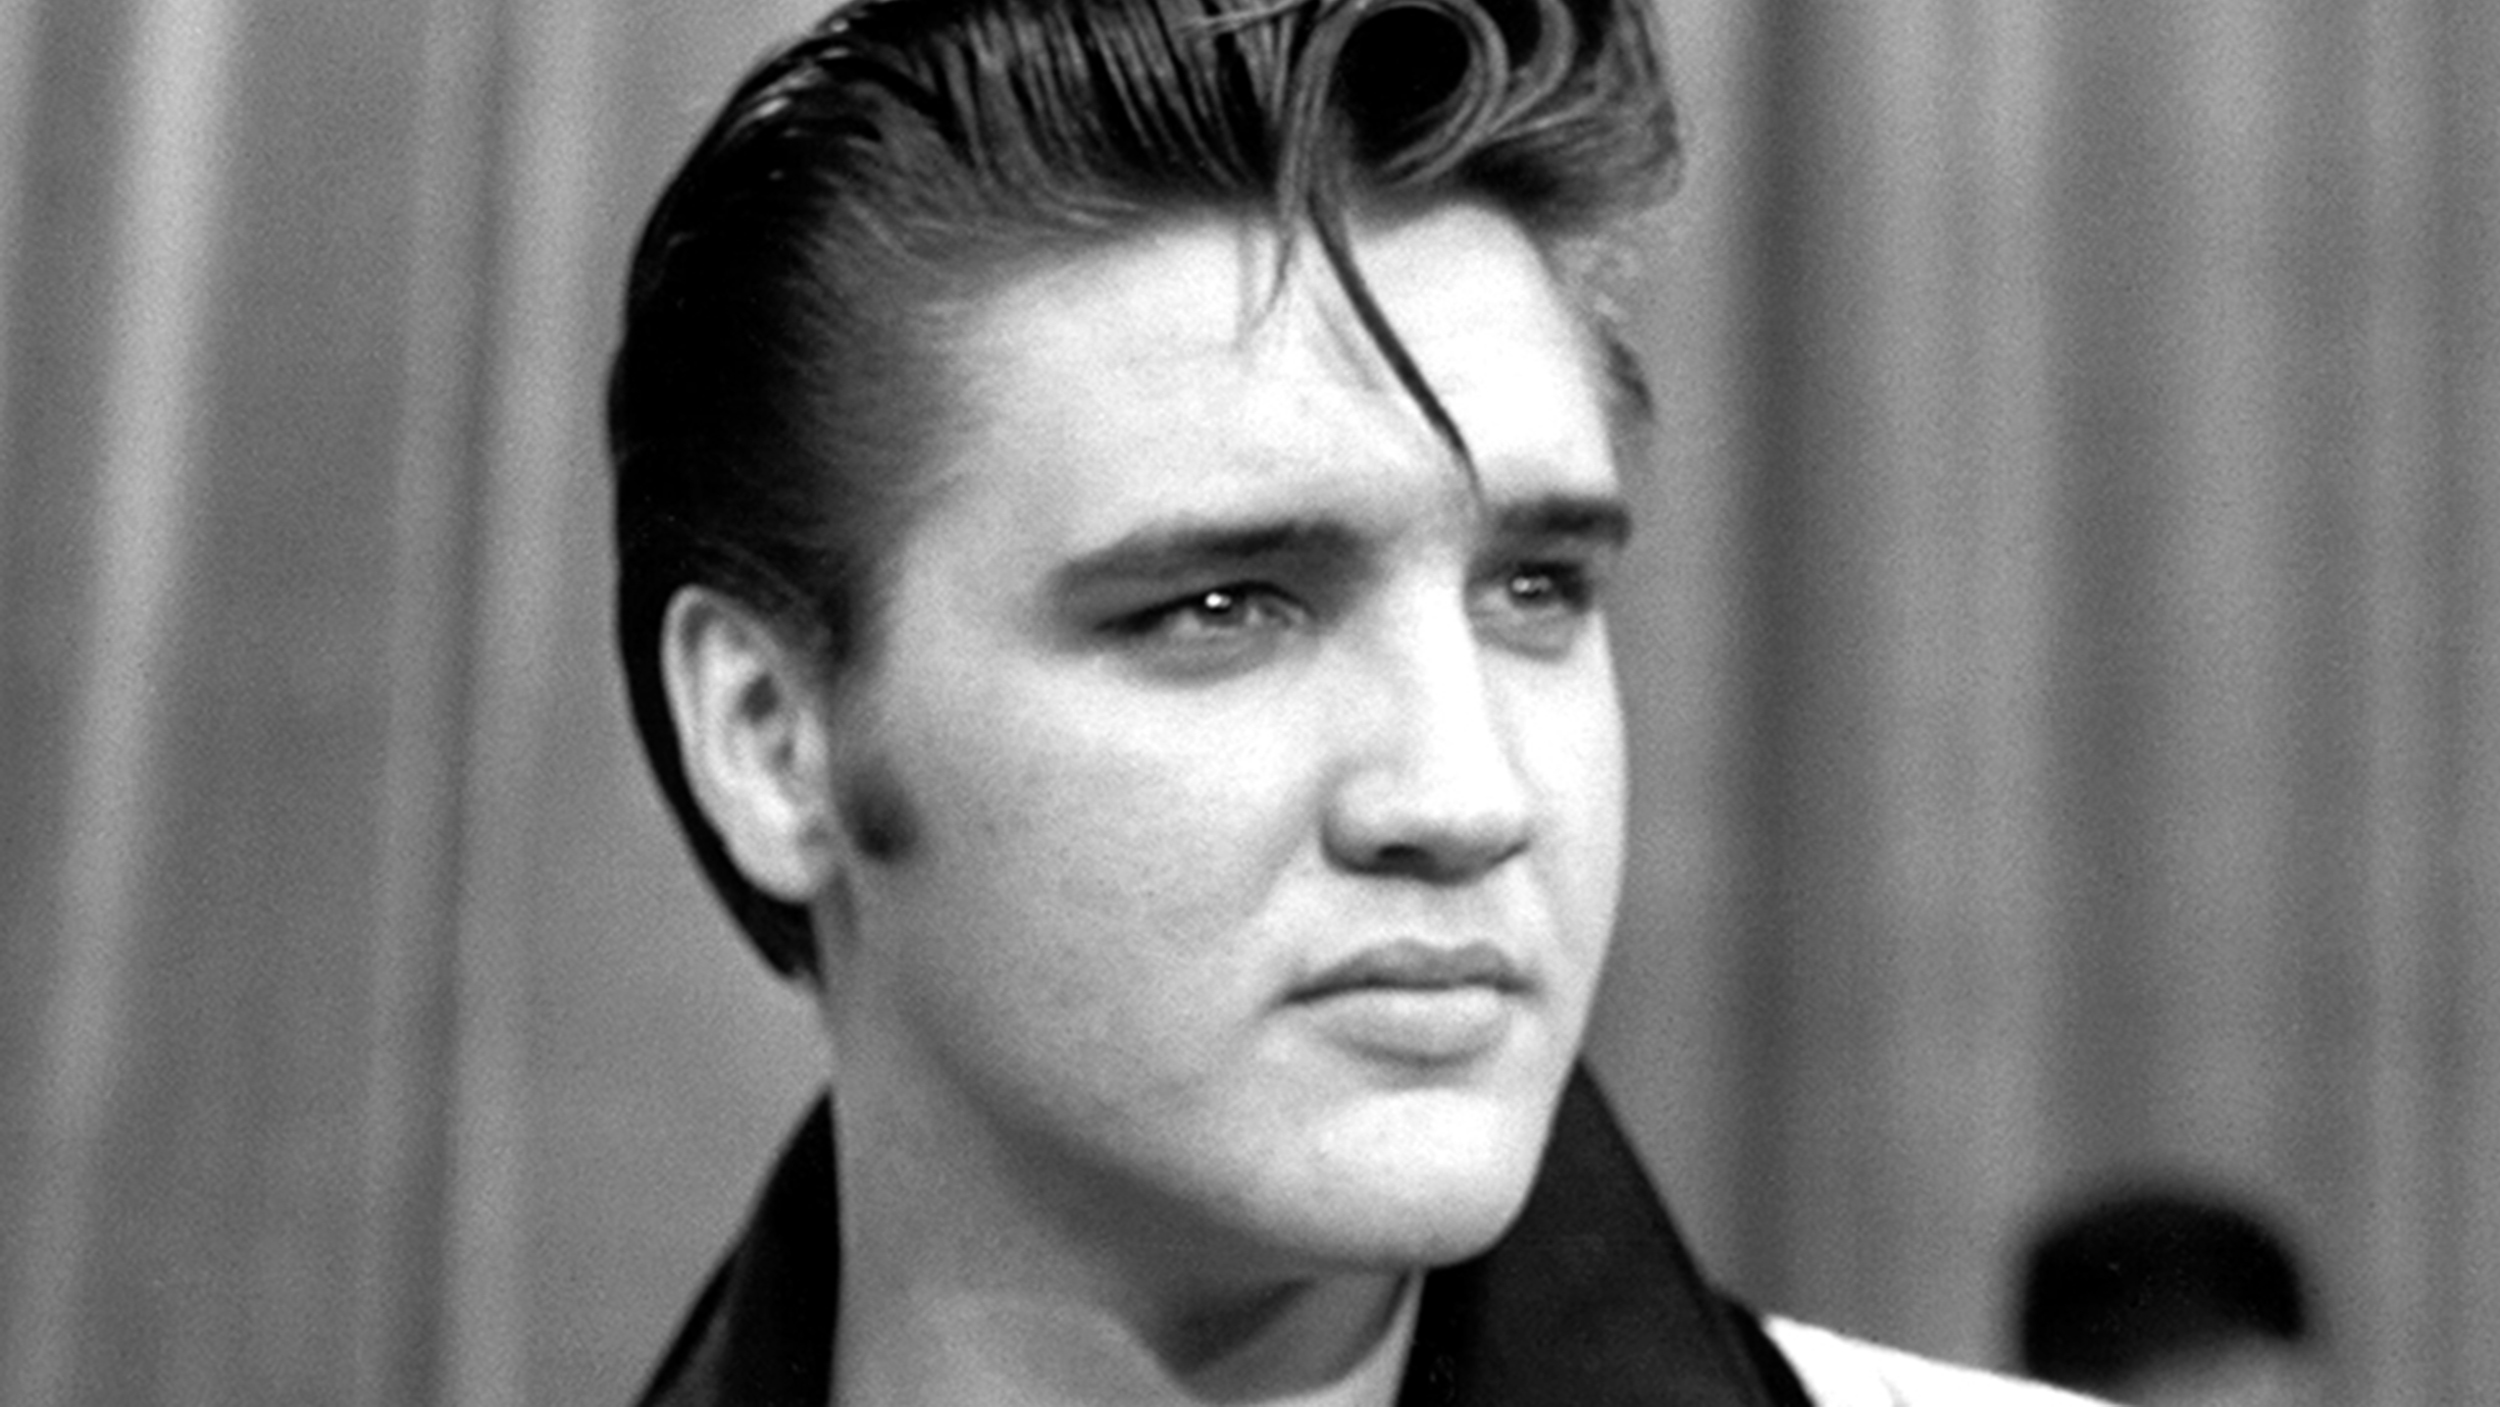 From Elvis to Kanye: The most memorable male style icons